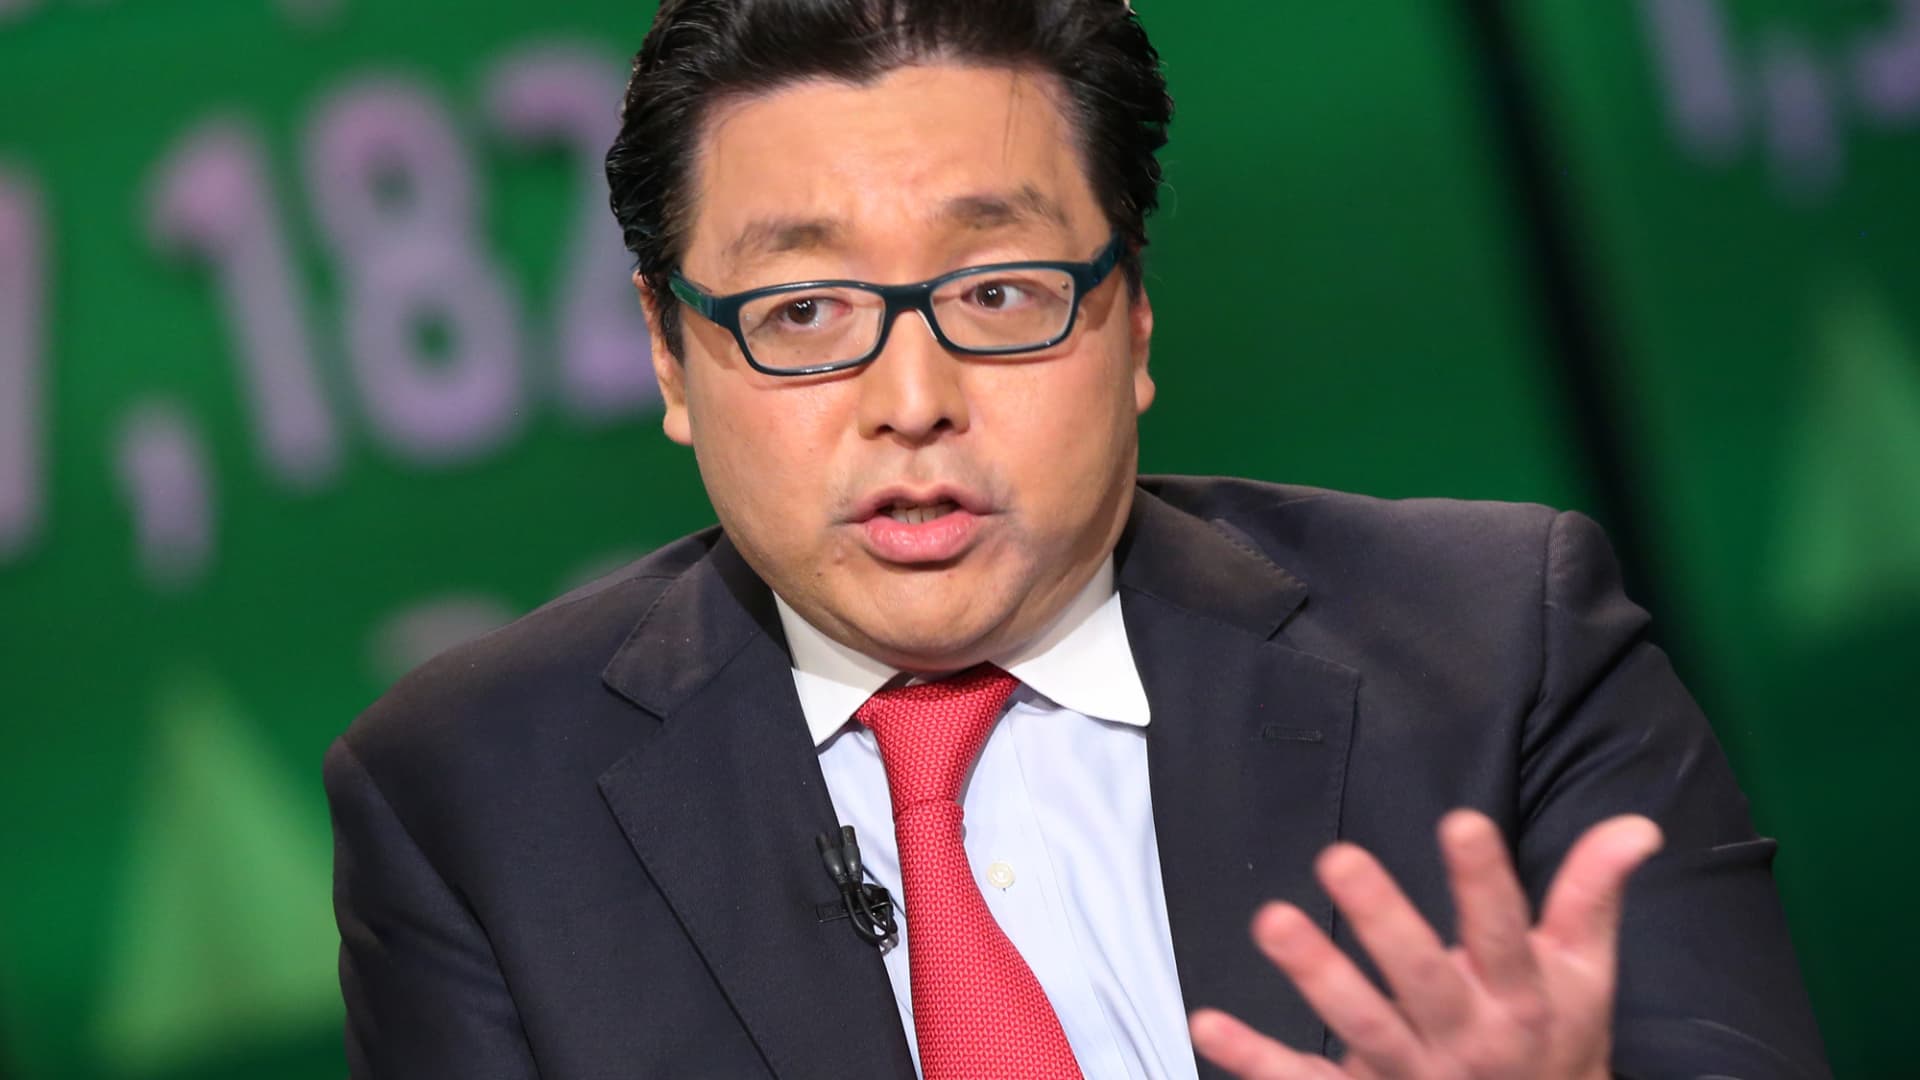 Tom Lee, the strategist who has correctly guided through the pandemic, sees  more gains next year